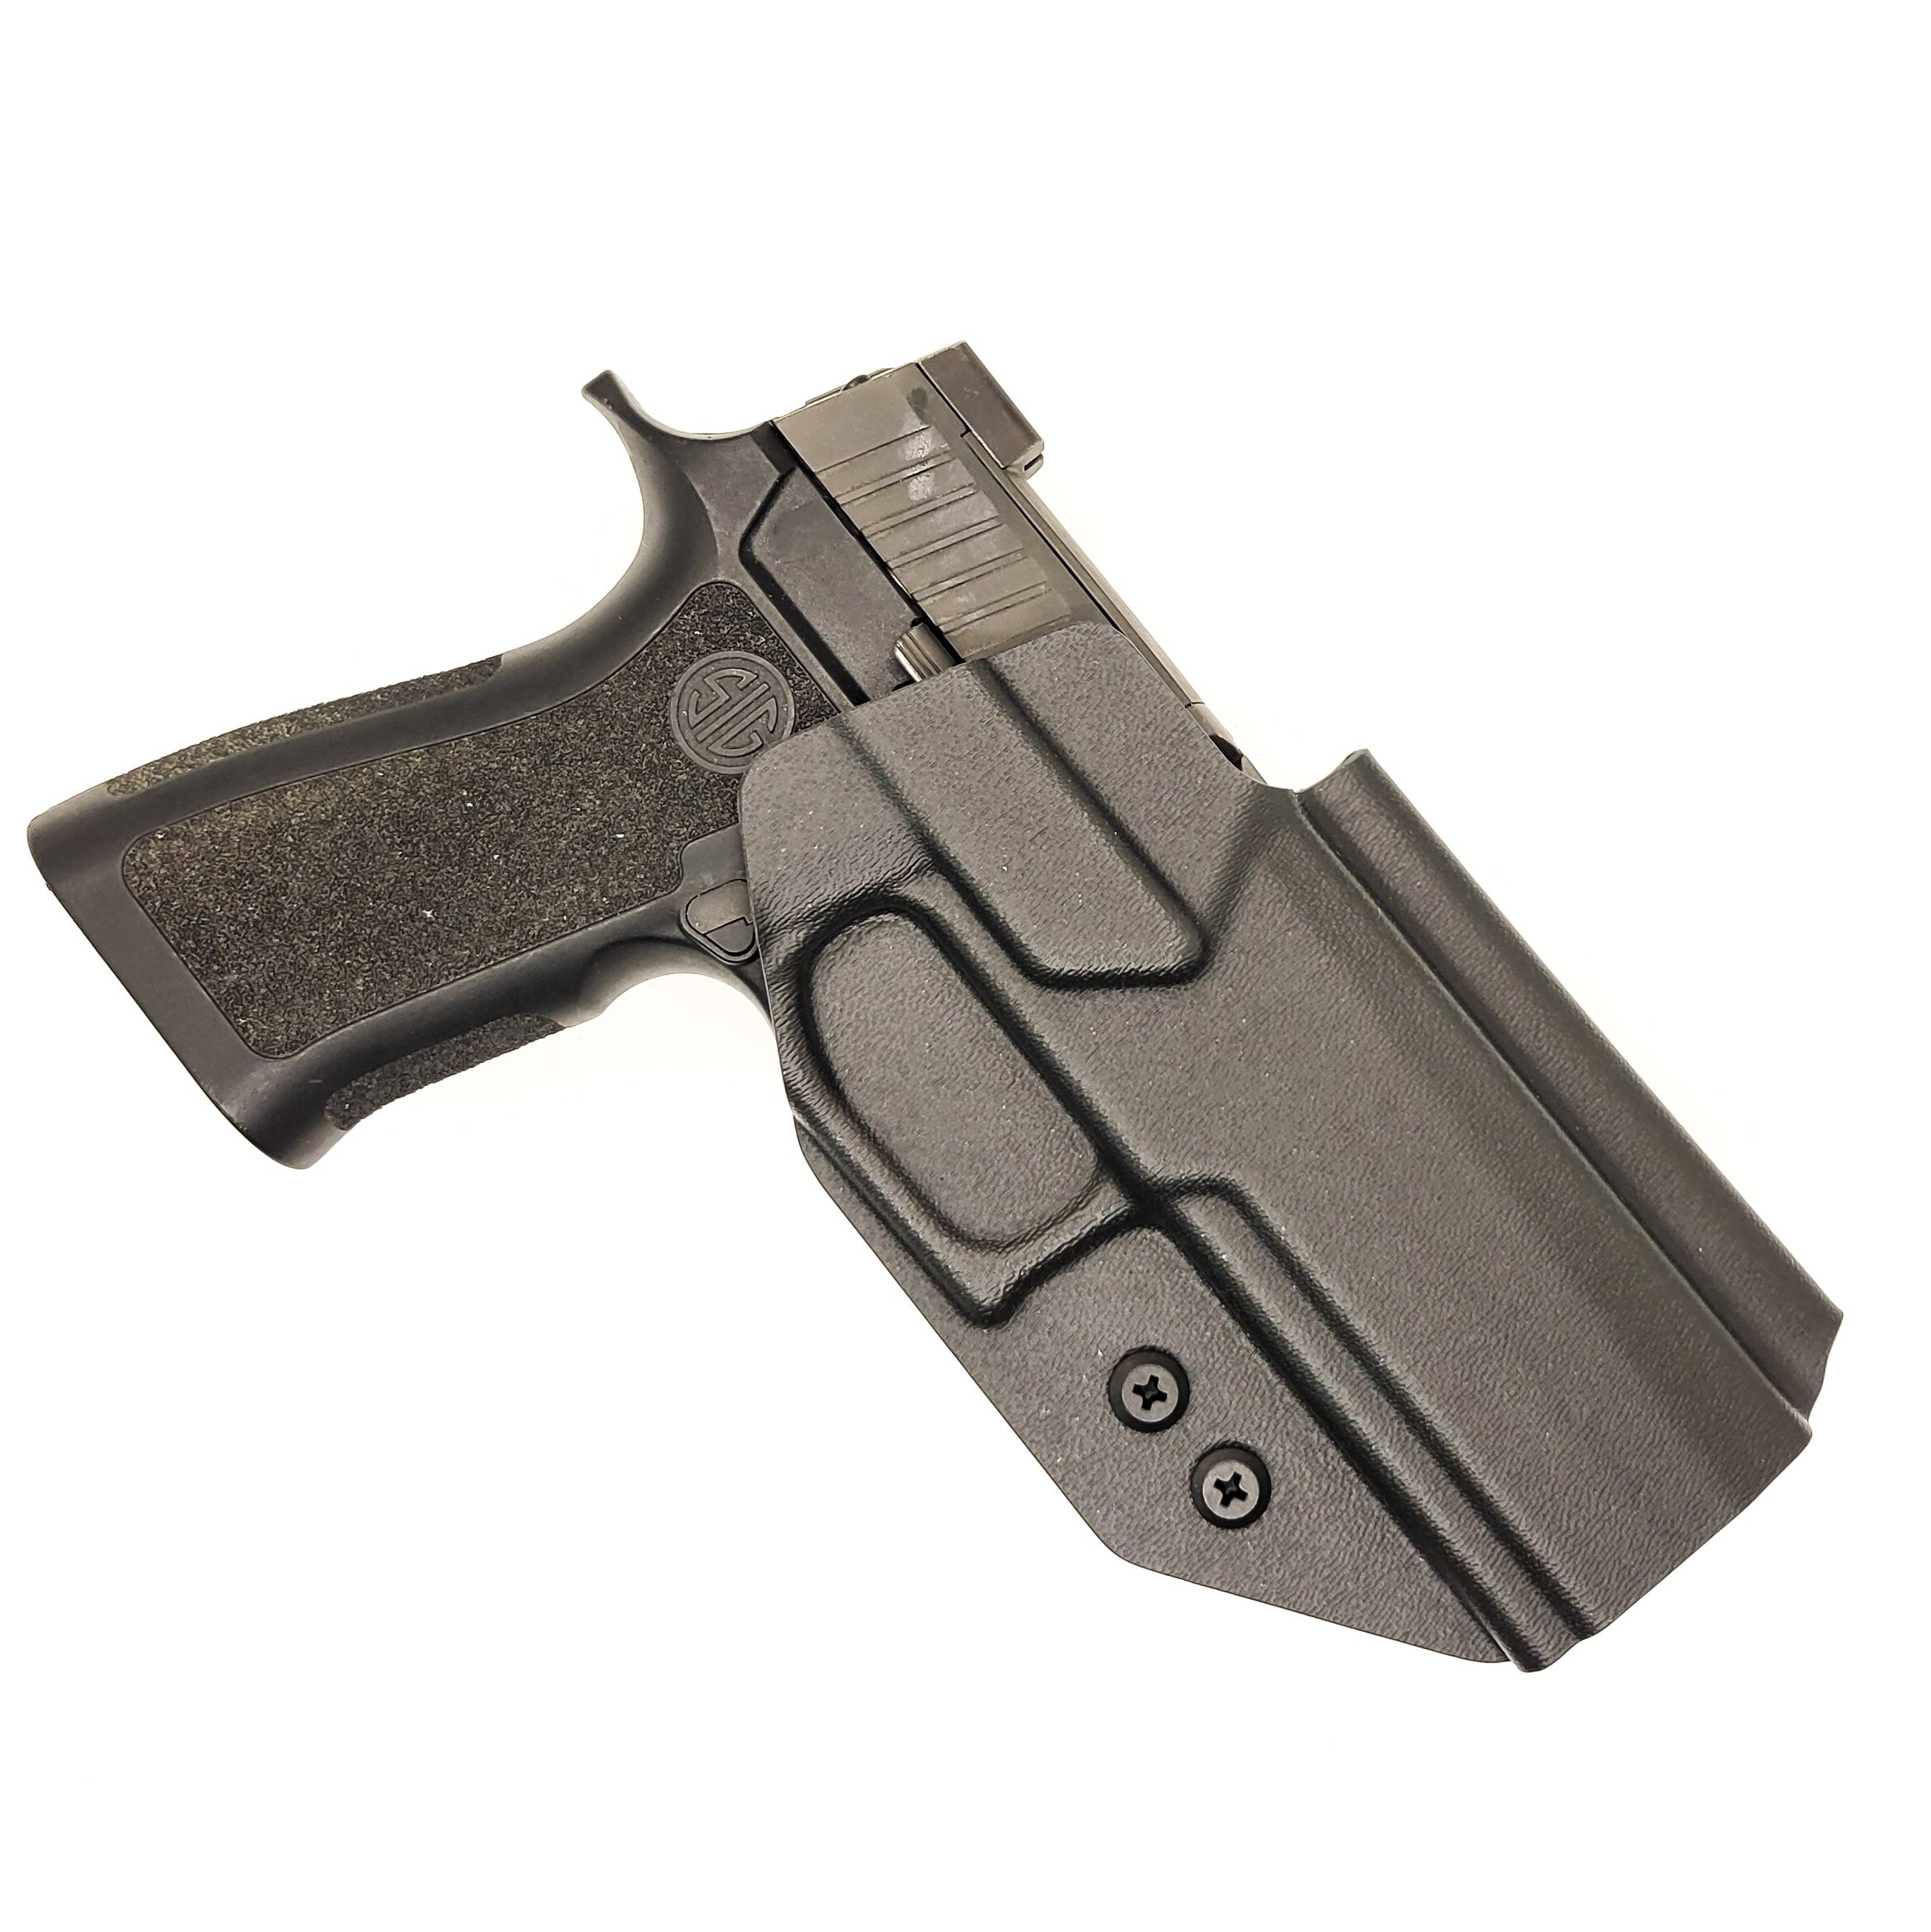 Outside Waistband Kydex Holster designed to fit the Sig Sauer P320 Carry, Compact, and M18 pistols and Wilson Combat Carry grip module with the GoGunsUSA Gas Pedal. Adjustable retention, open muzzle for threaded barrels and compensators & cleared for red dot sights. Made in USA by law enforcement and military veterans.